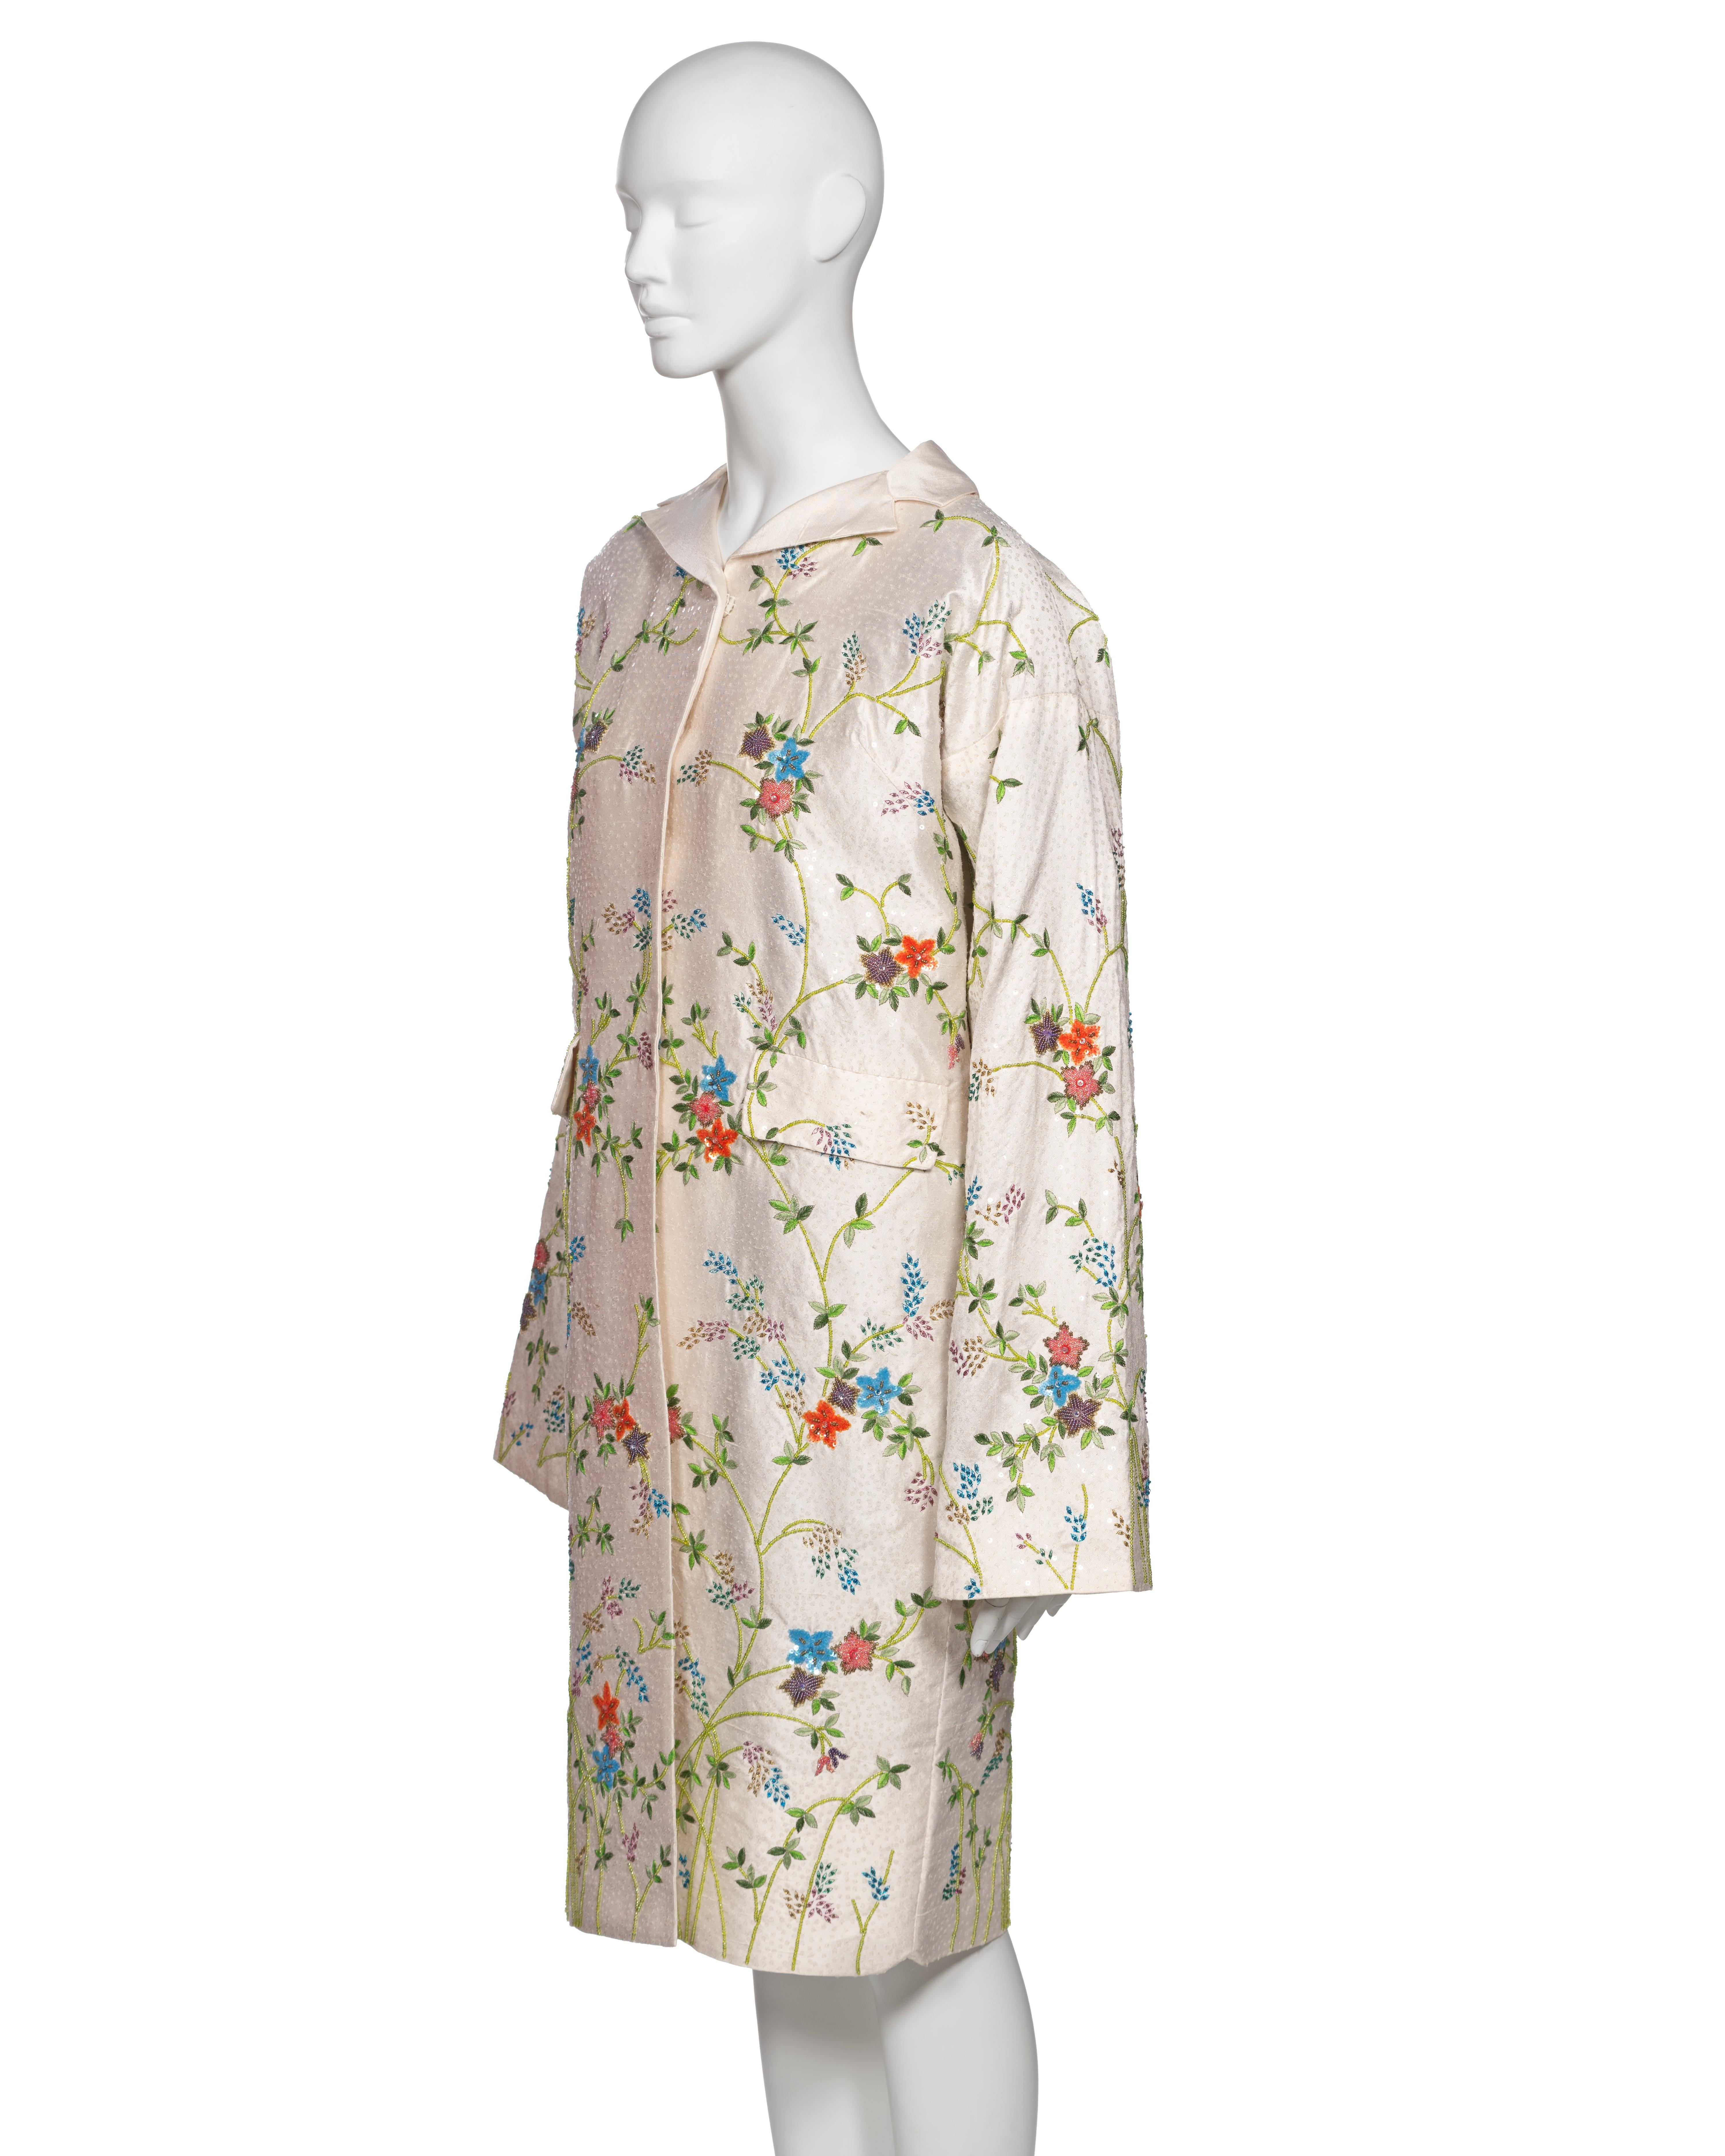 Dolce & Gabbana Hand-Embroidered White Raw Silk Evening Couture Coat, ss 1997 For Sale 12